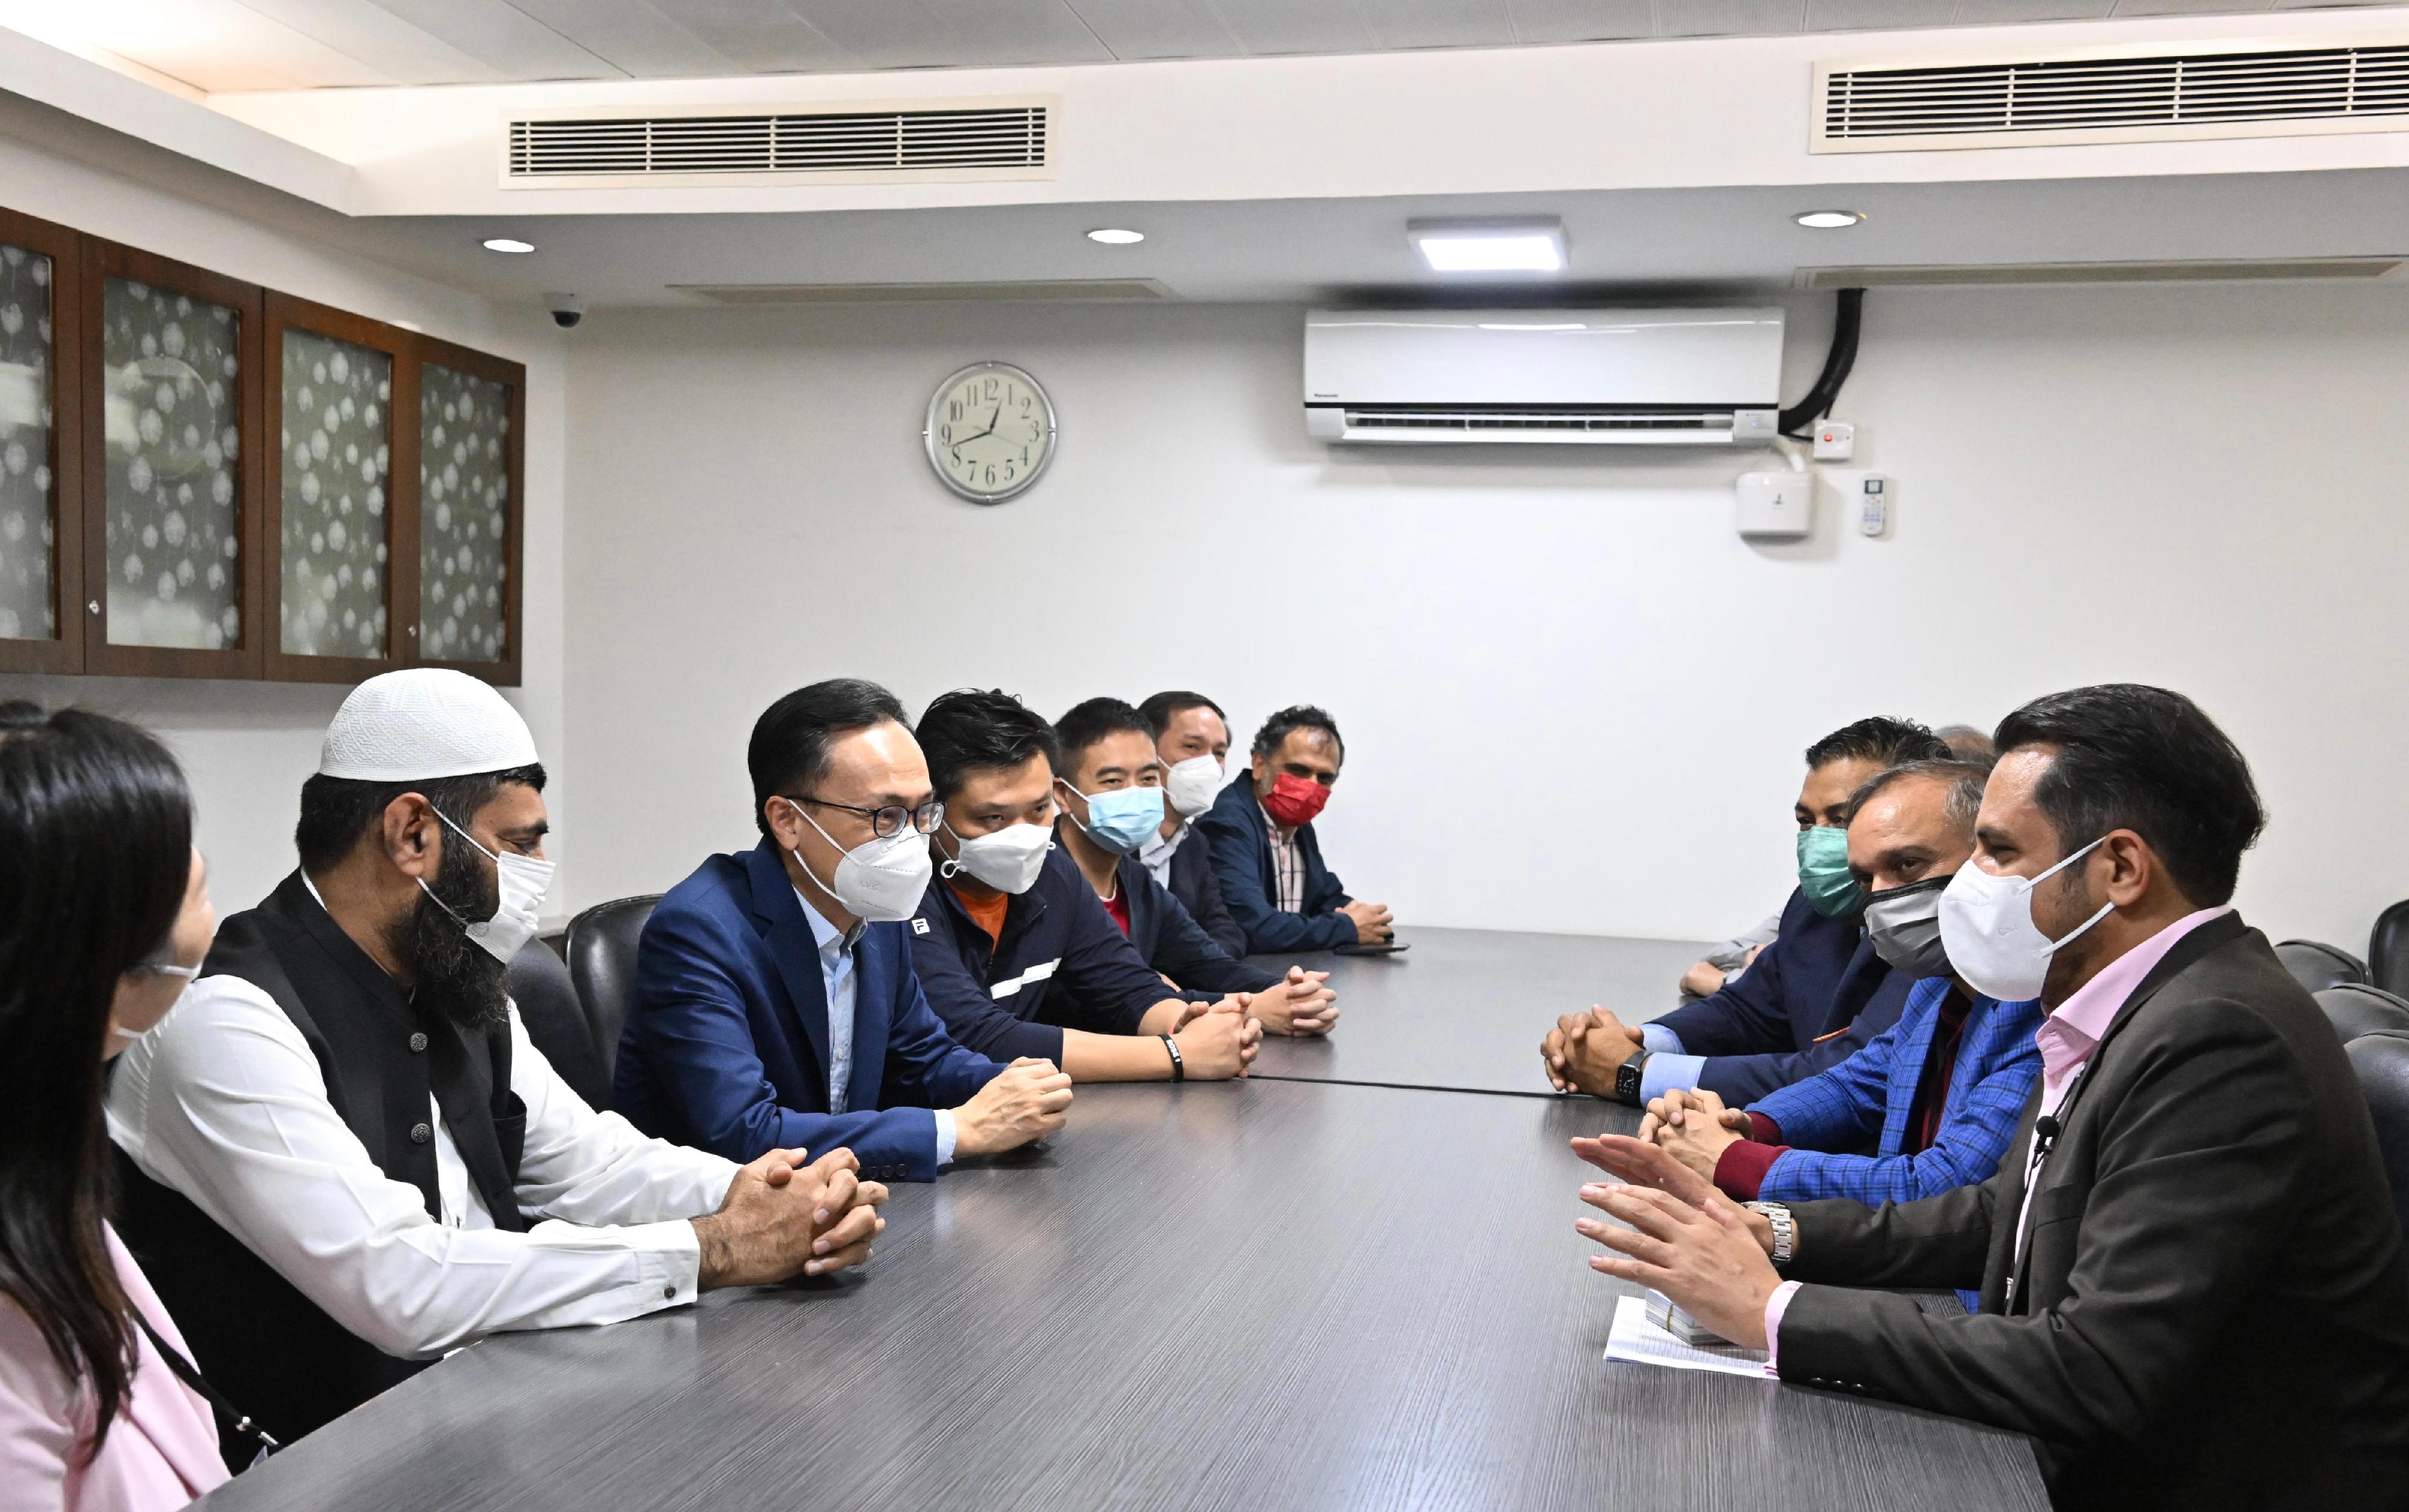 The Secretary for the Civil Service, Mr Patrick Nip, went to the Kowloon Masjid and Islamic Centre this afternoon (March 19) to inspect the BioNTech vaccination of male and female Muslims in separate spaces by an outreach team. Photo shows Mr Nip (third left) chatting with the representatives of the Kowloon Mosque. 